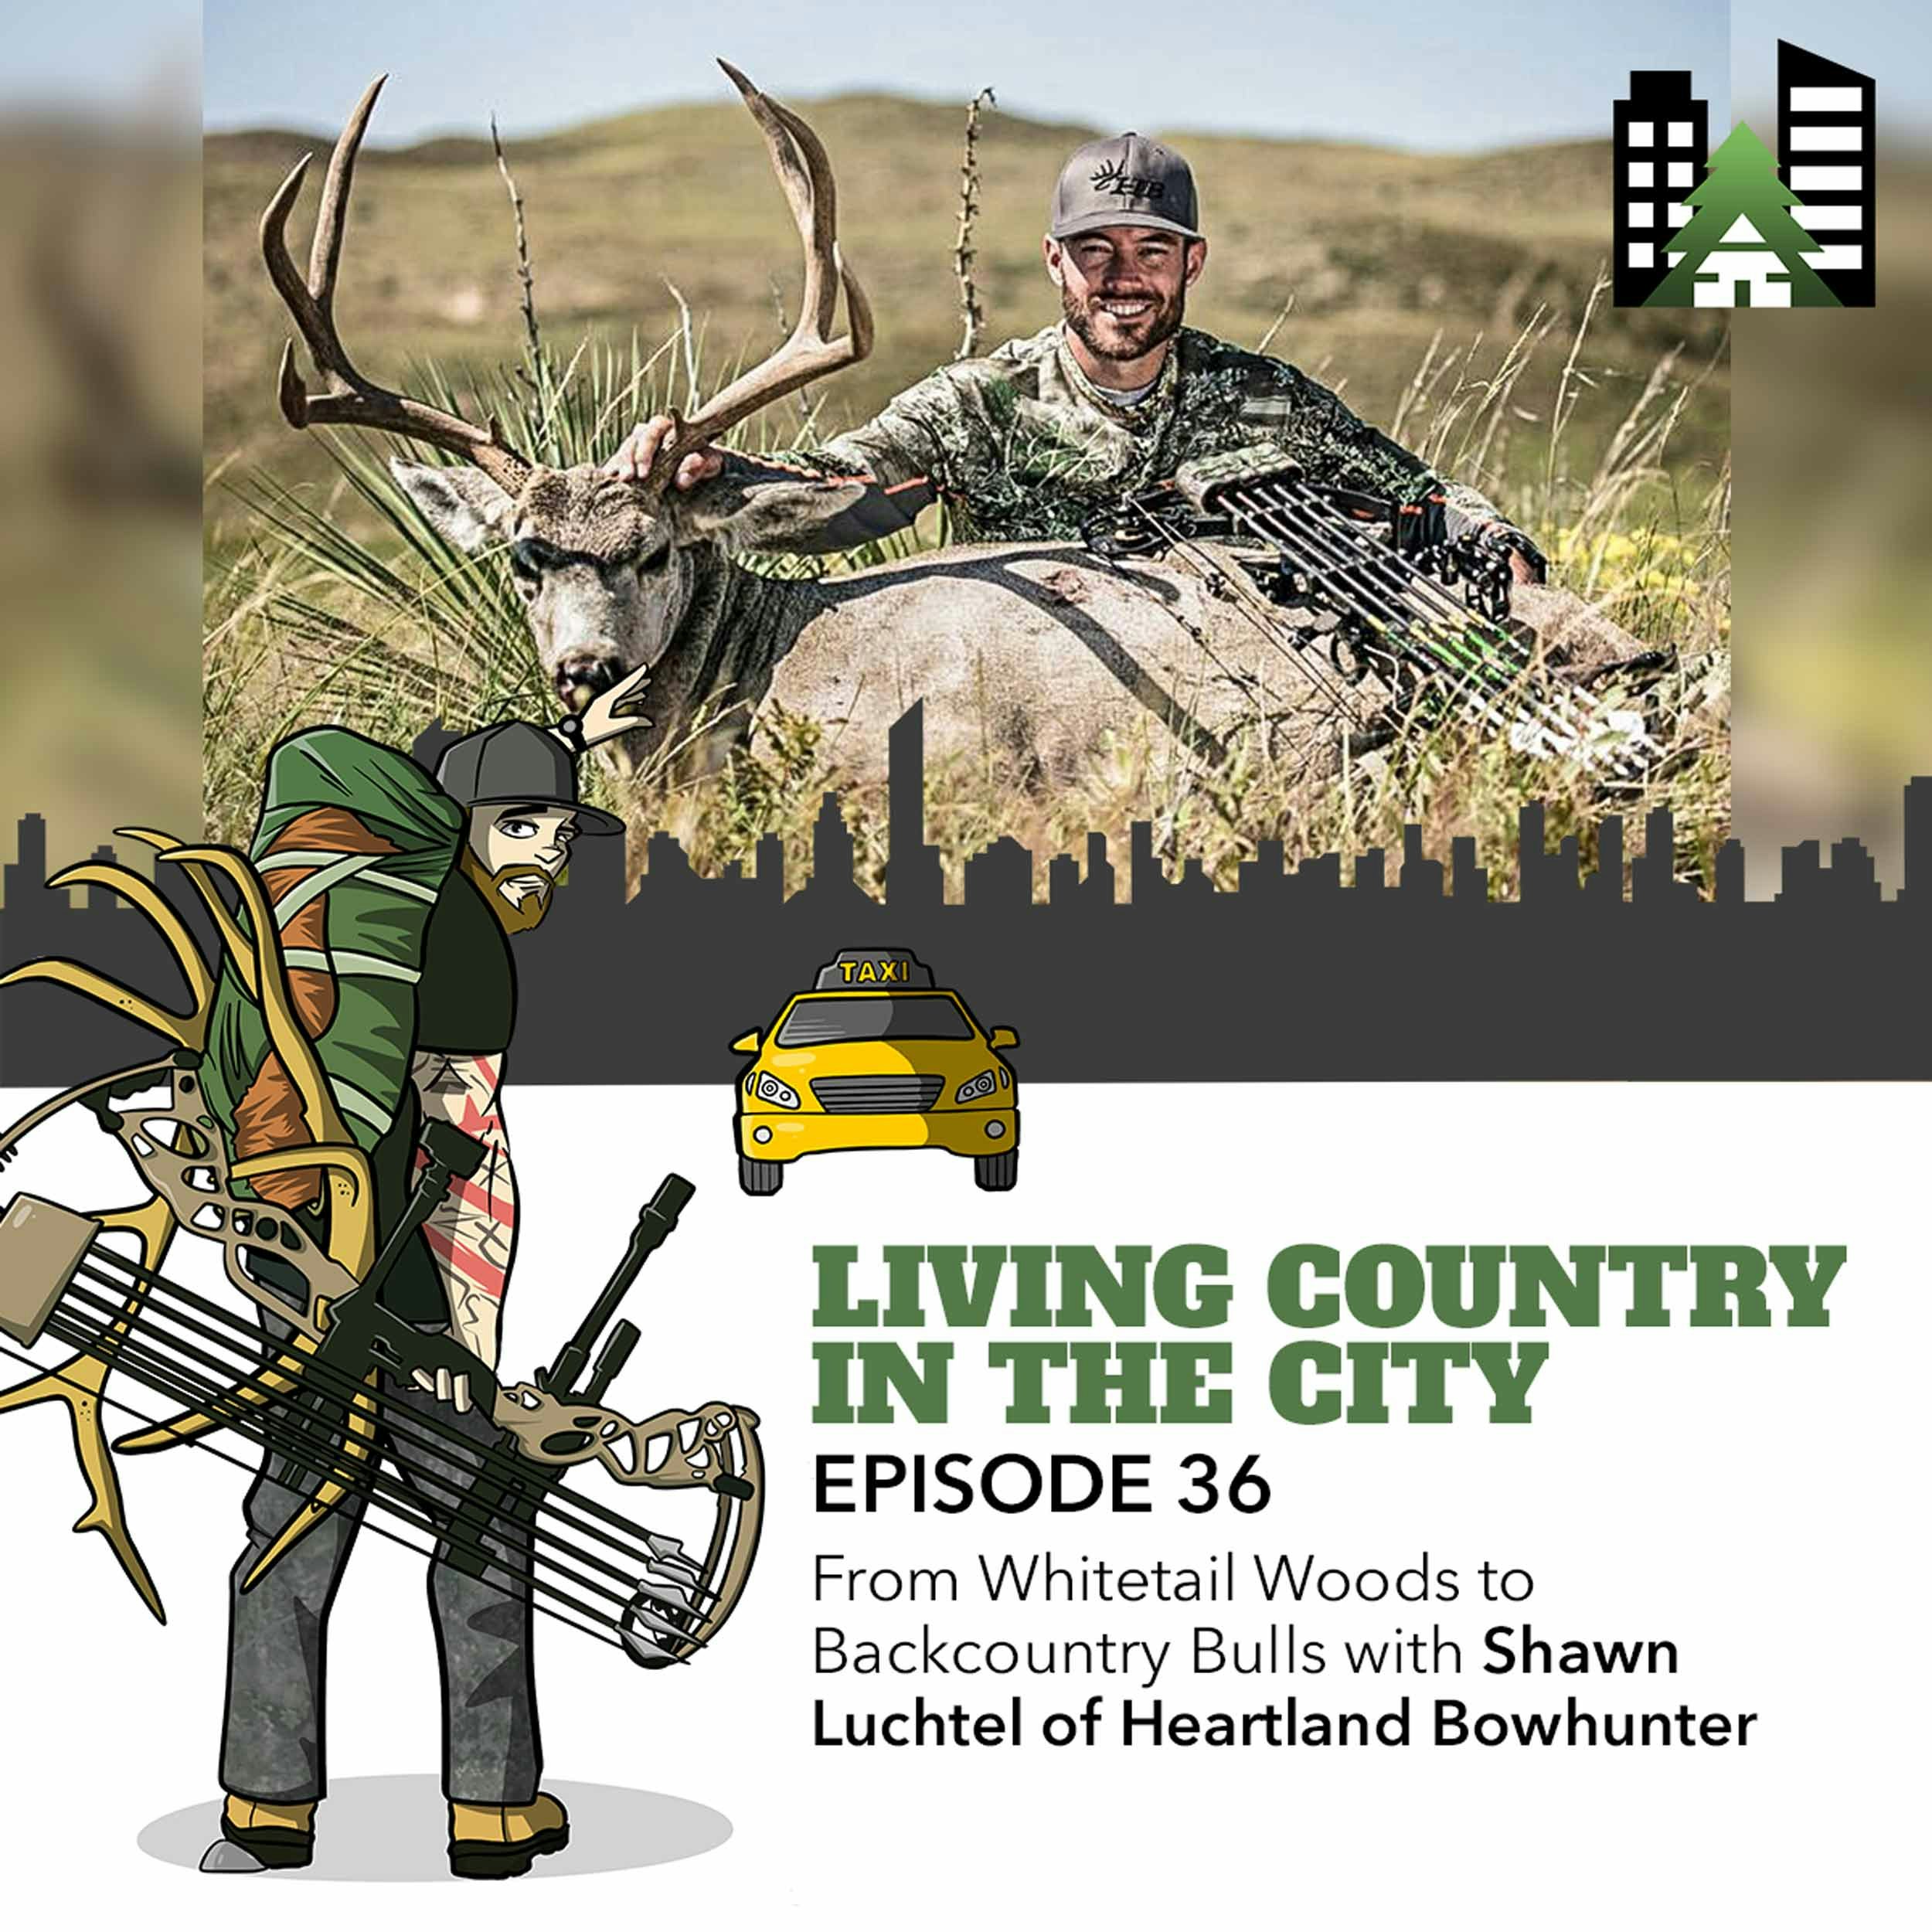 Ep 36 - From Whitetail Woods to Backcountry Bulls with Shawn Luchtel of Heartland Bowhunter